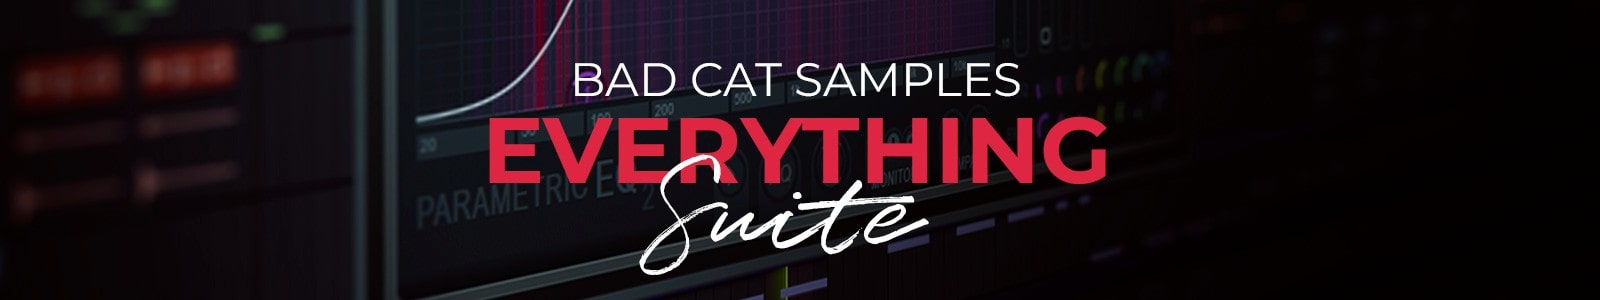 Bad Cat Samples Everything Suite